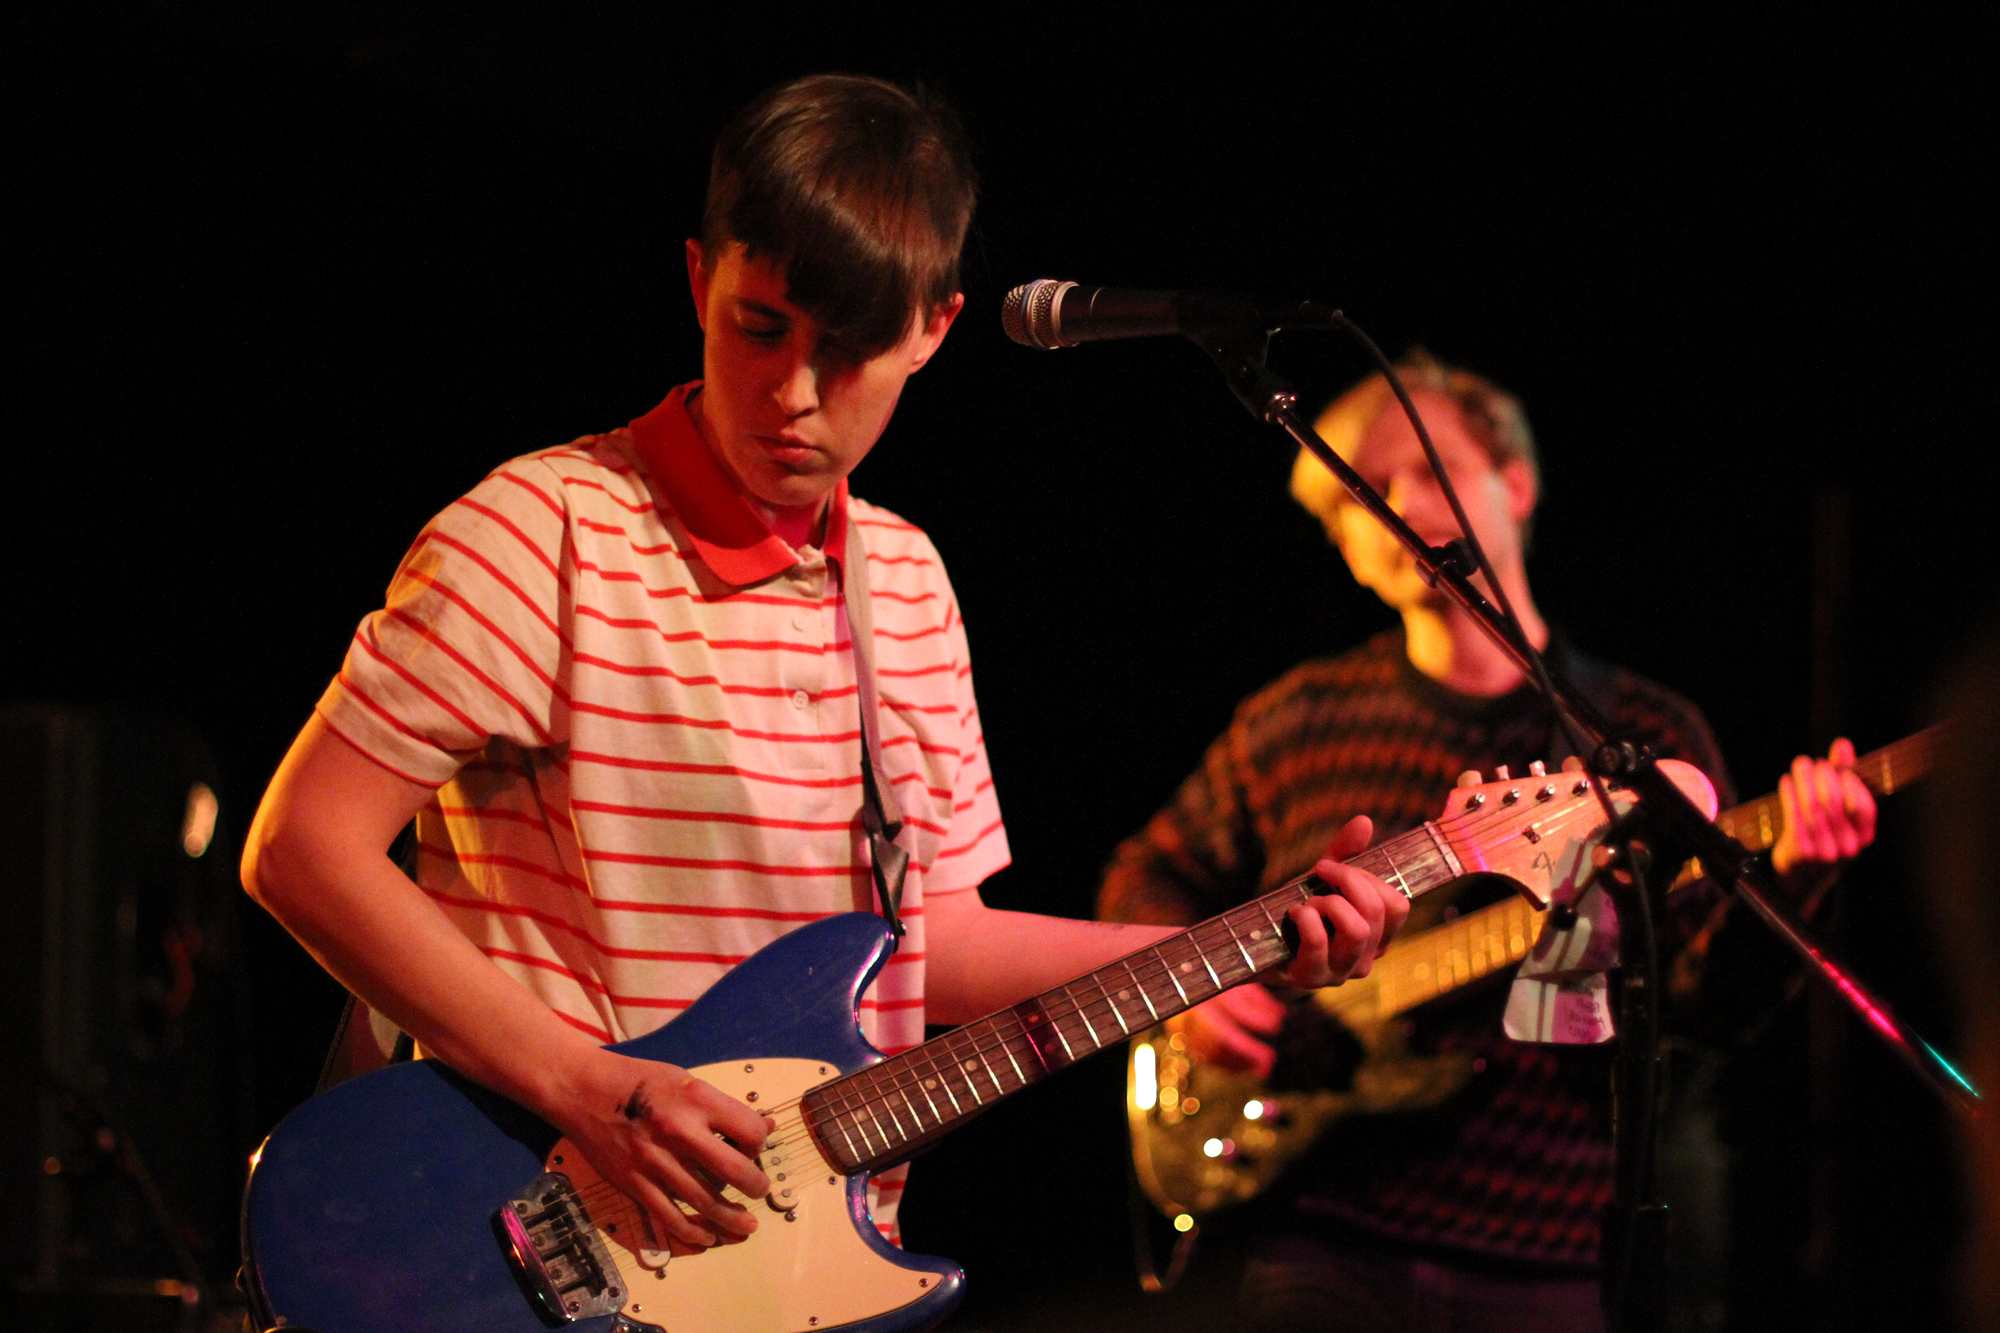 Lower Dens performs at Black Cat in Washington, D.C. on March 11, 2011.